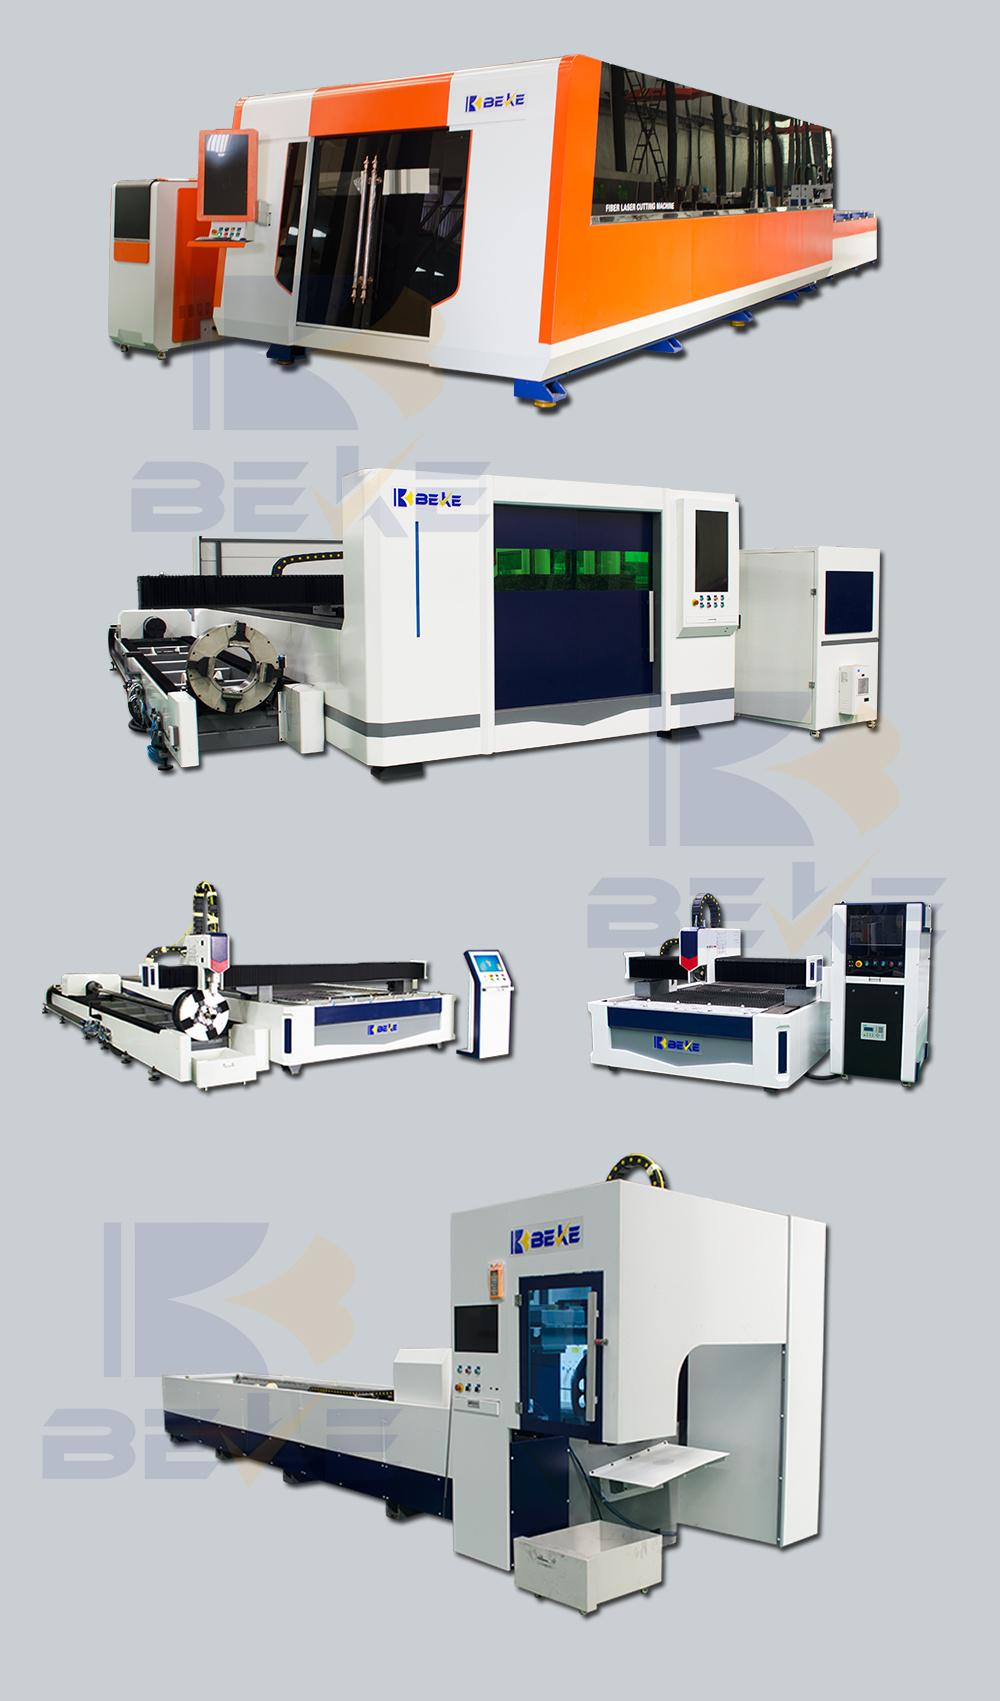 Beke Brand New Style 4020 3000W Plate and Tube Sheet Metallaser Cutter